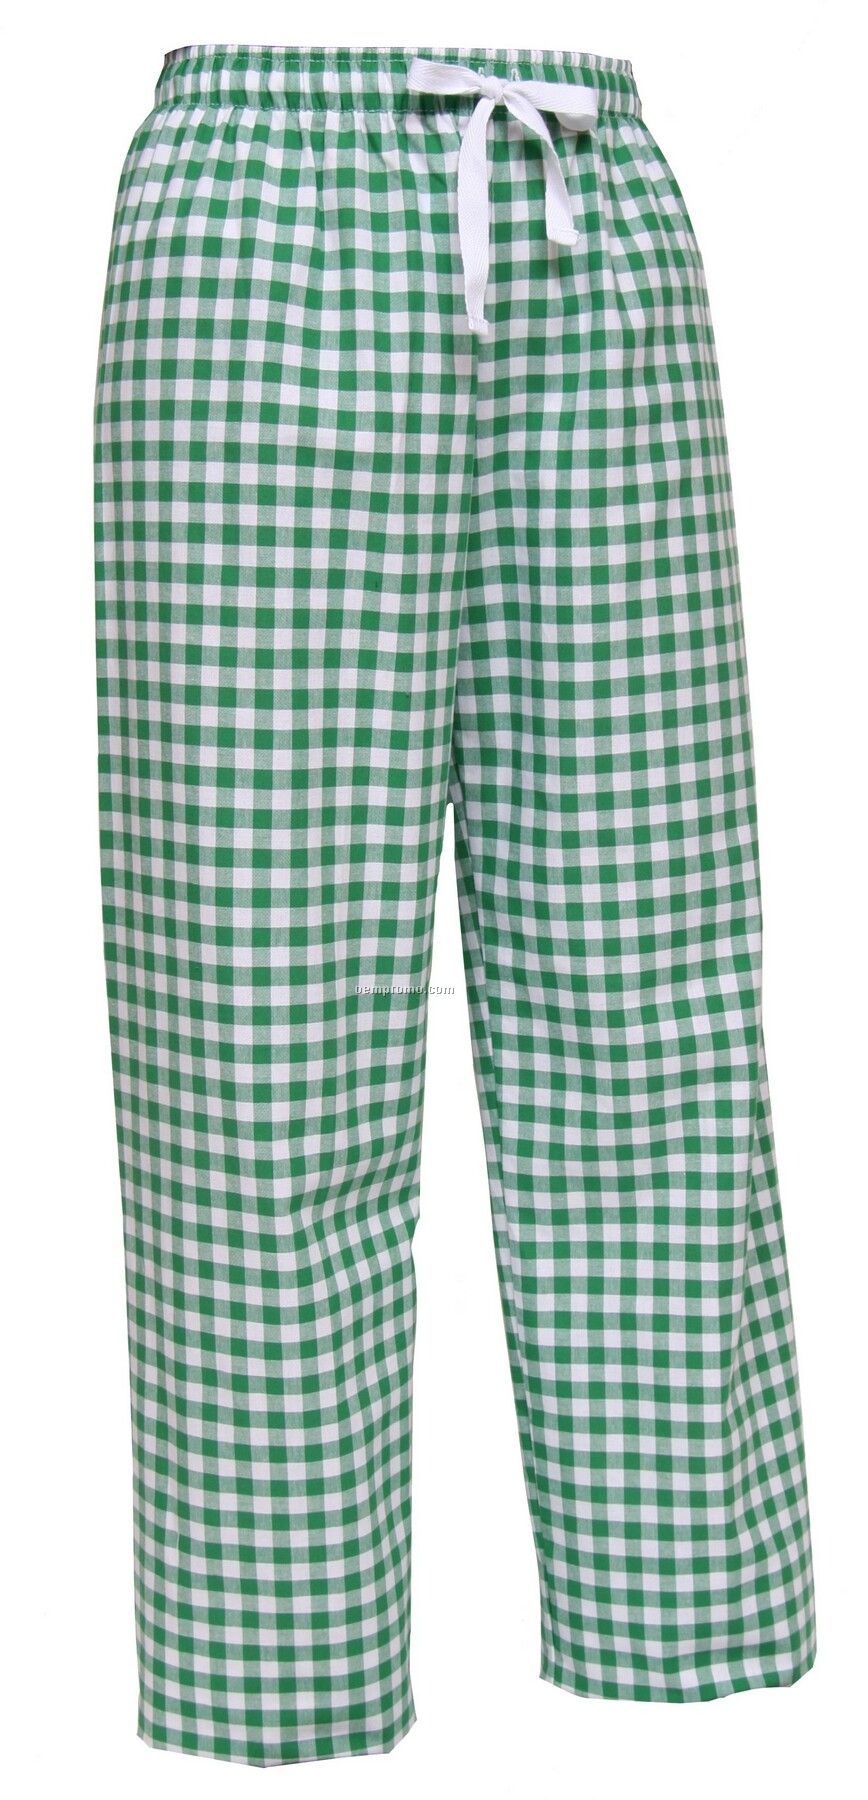 Adult Grassy Green Keep It Cool Pant